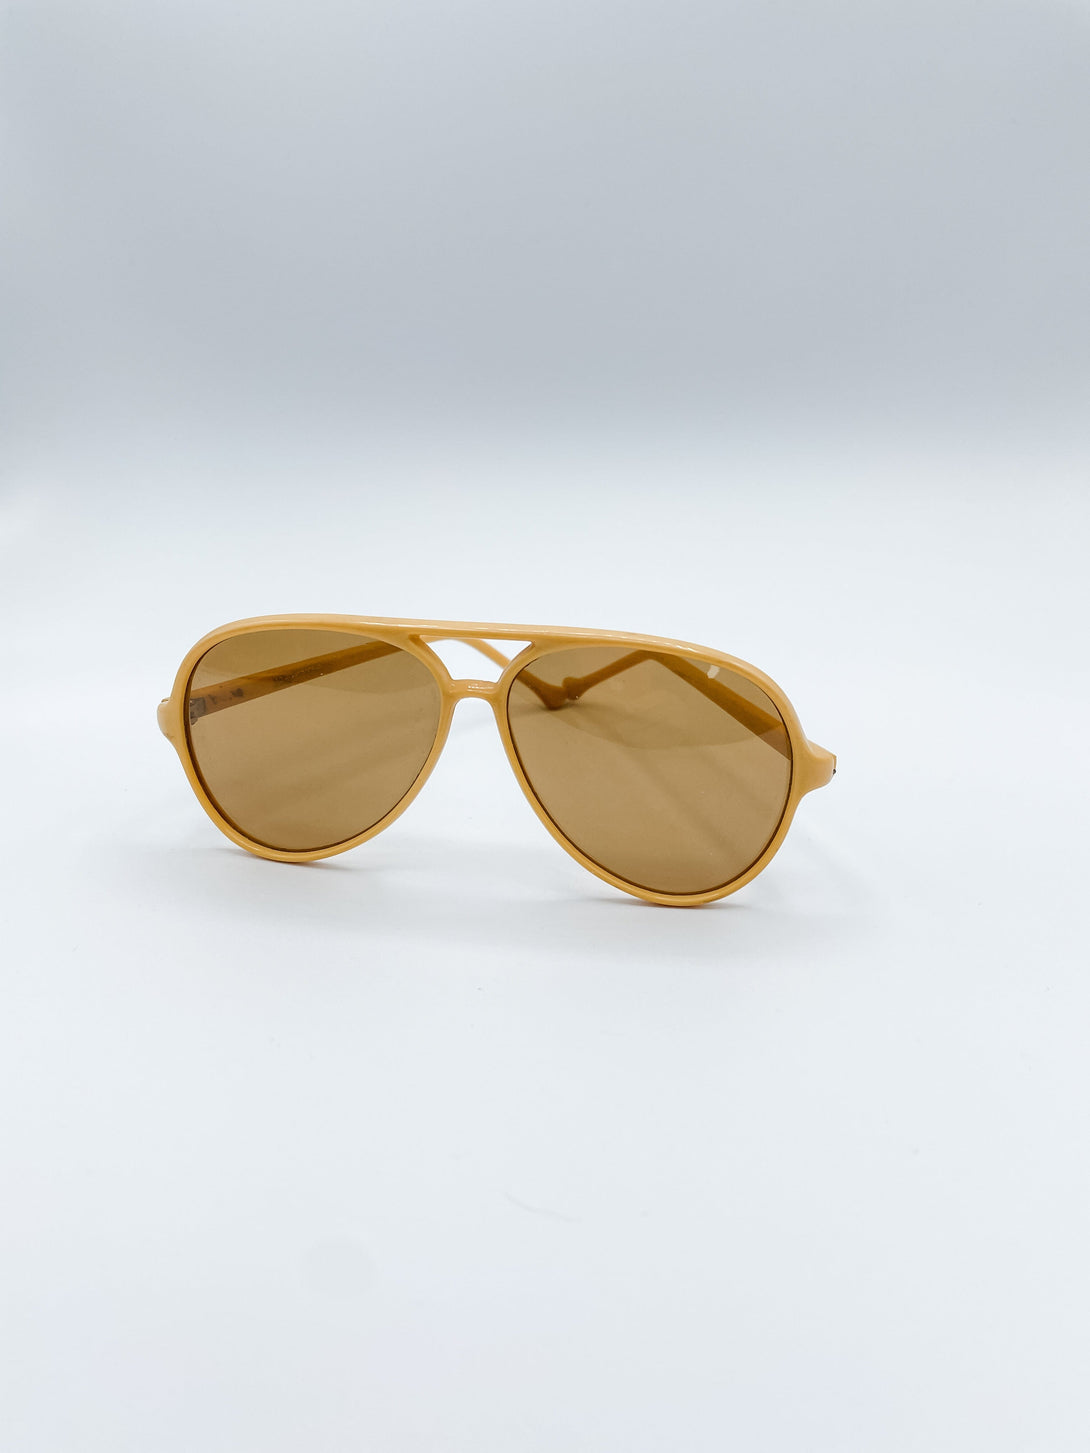 Vintage Buch and Deichmann Sunglasses in Aviator Style